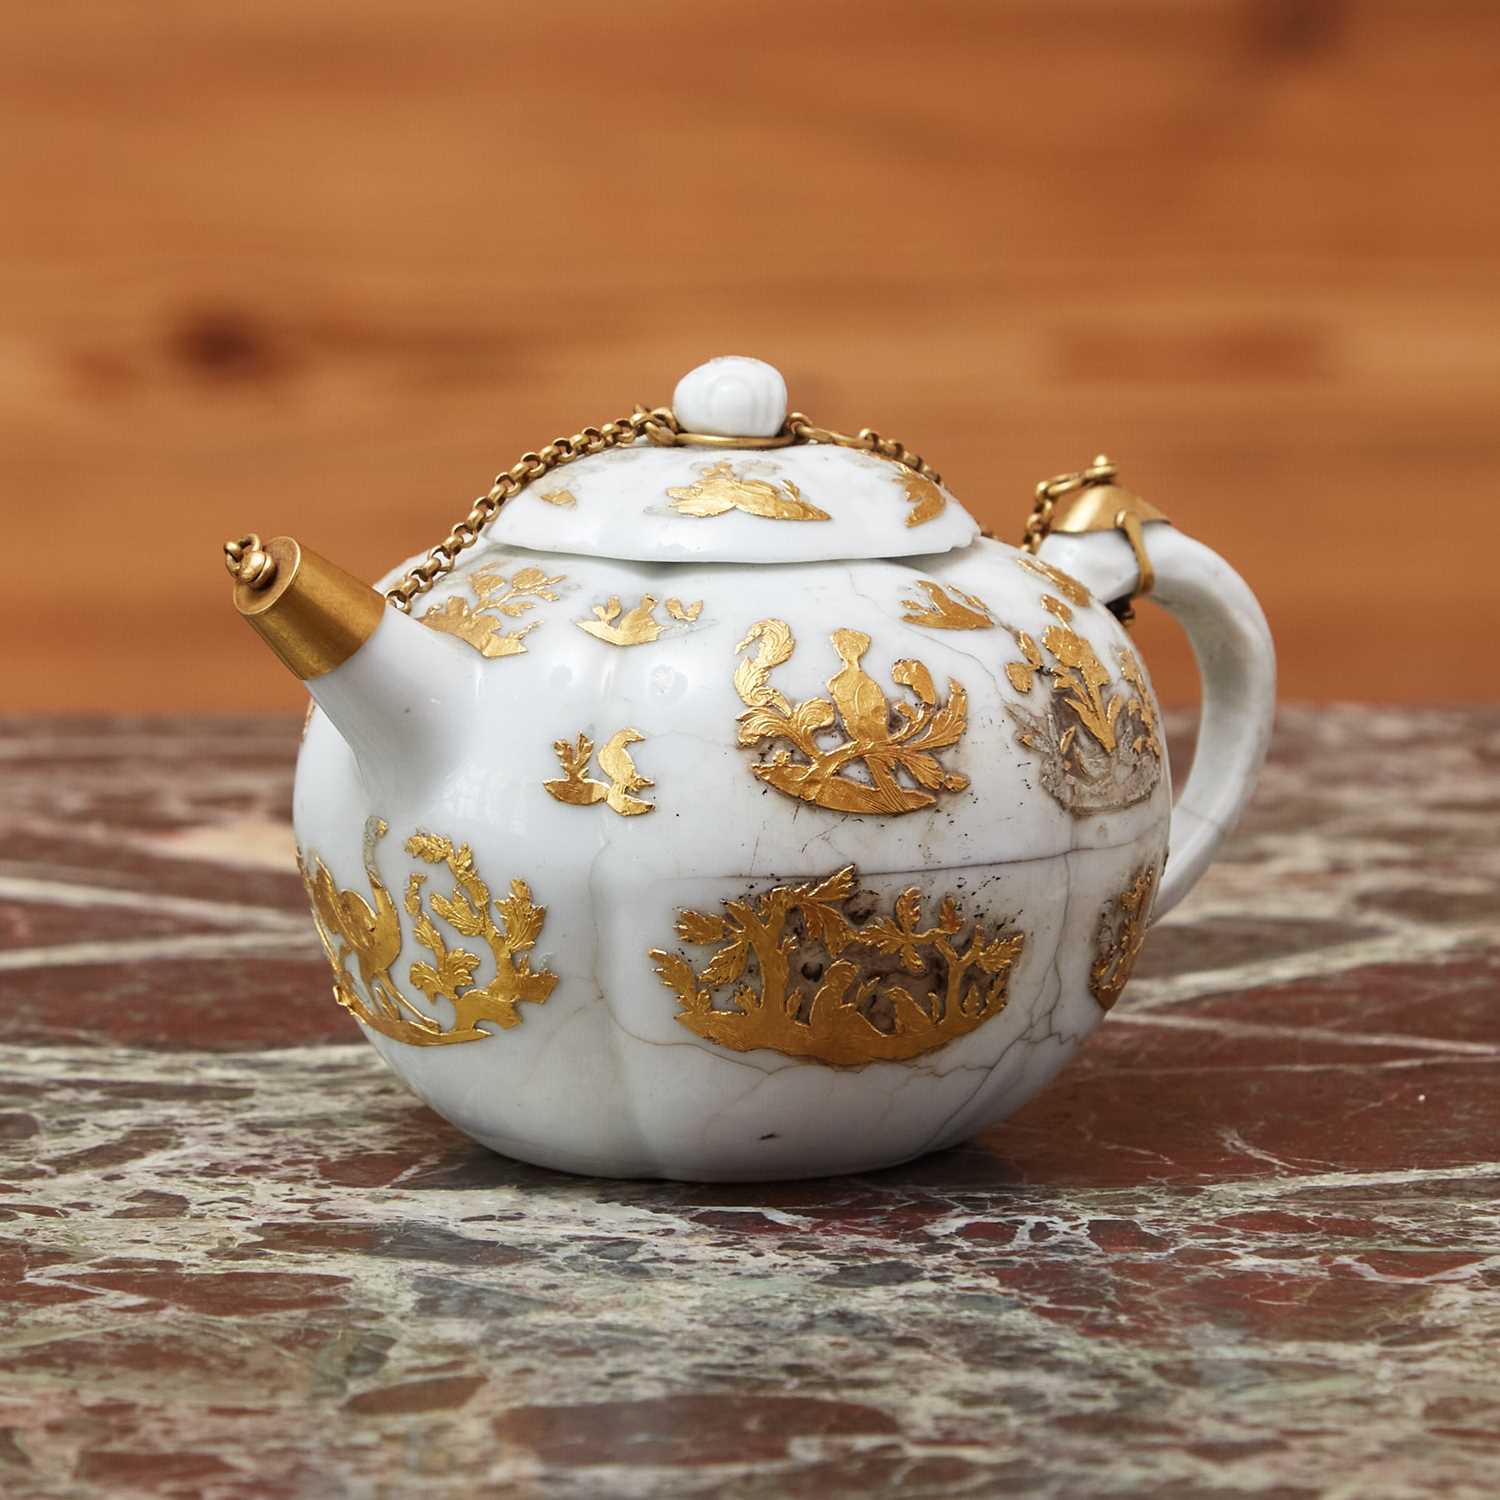 Lot 408 - SILVER-GILT MOUNTED CHINESE PORCELAIN SMALL LOBED TEAPOT AND COVER WITH APPLIQUE GOLD DECORATION